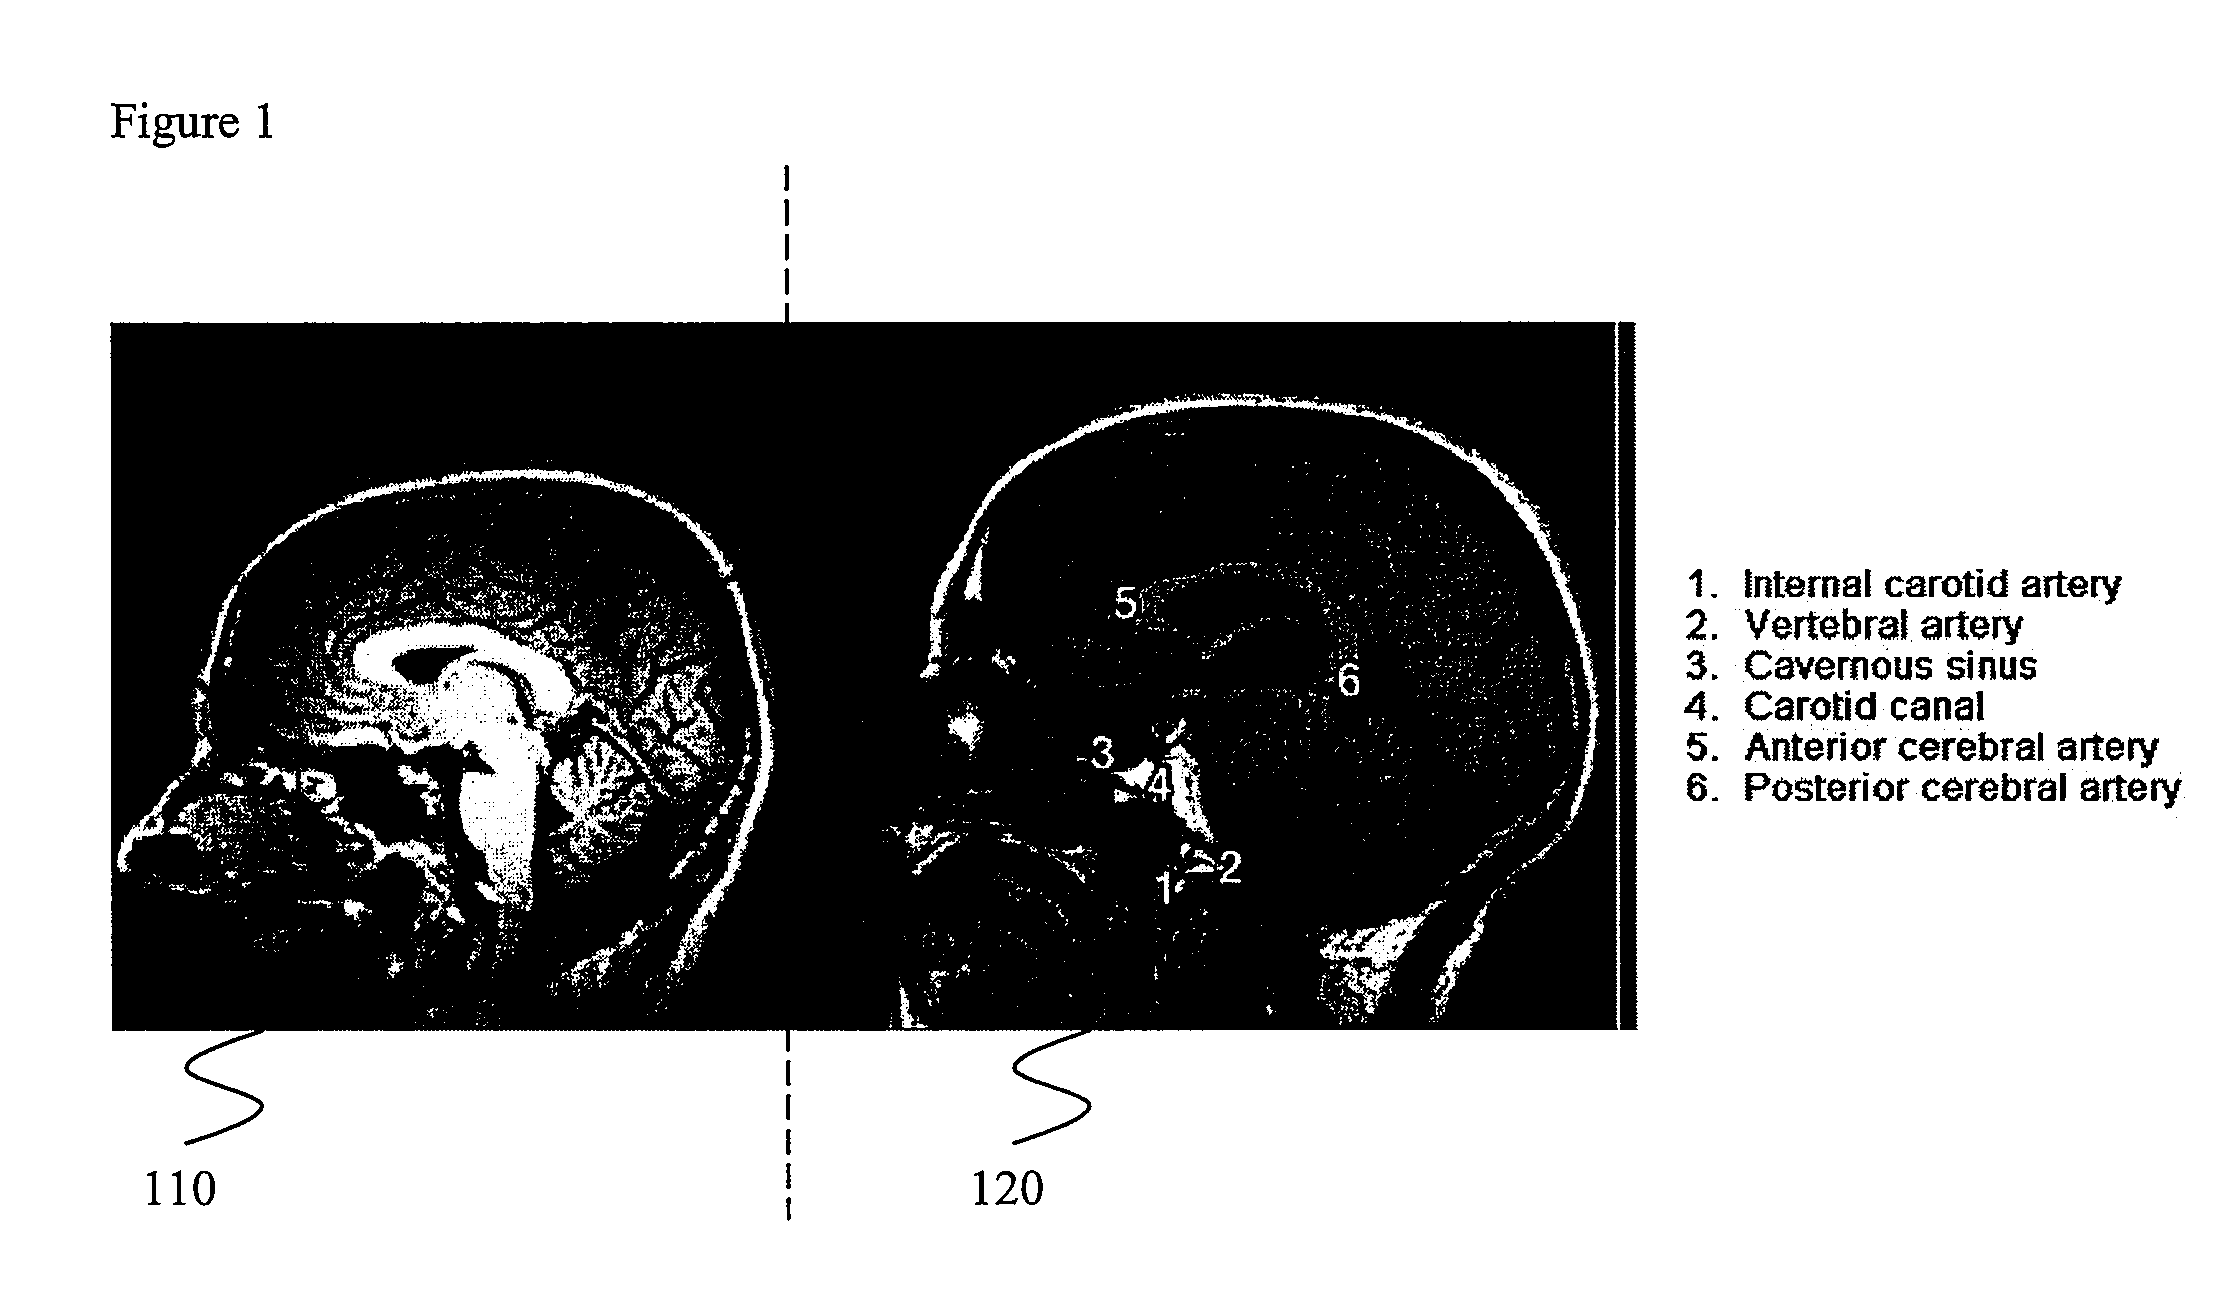 Systems and Methods for Synchronized Image Viewing With an Image Atlas